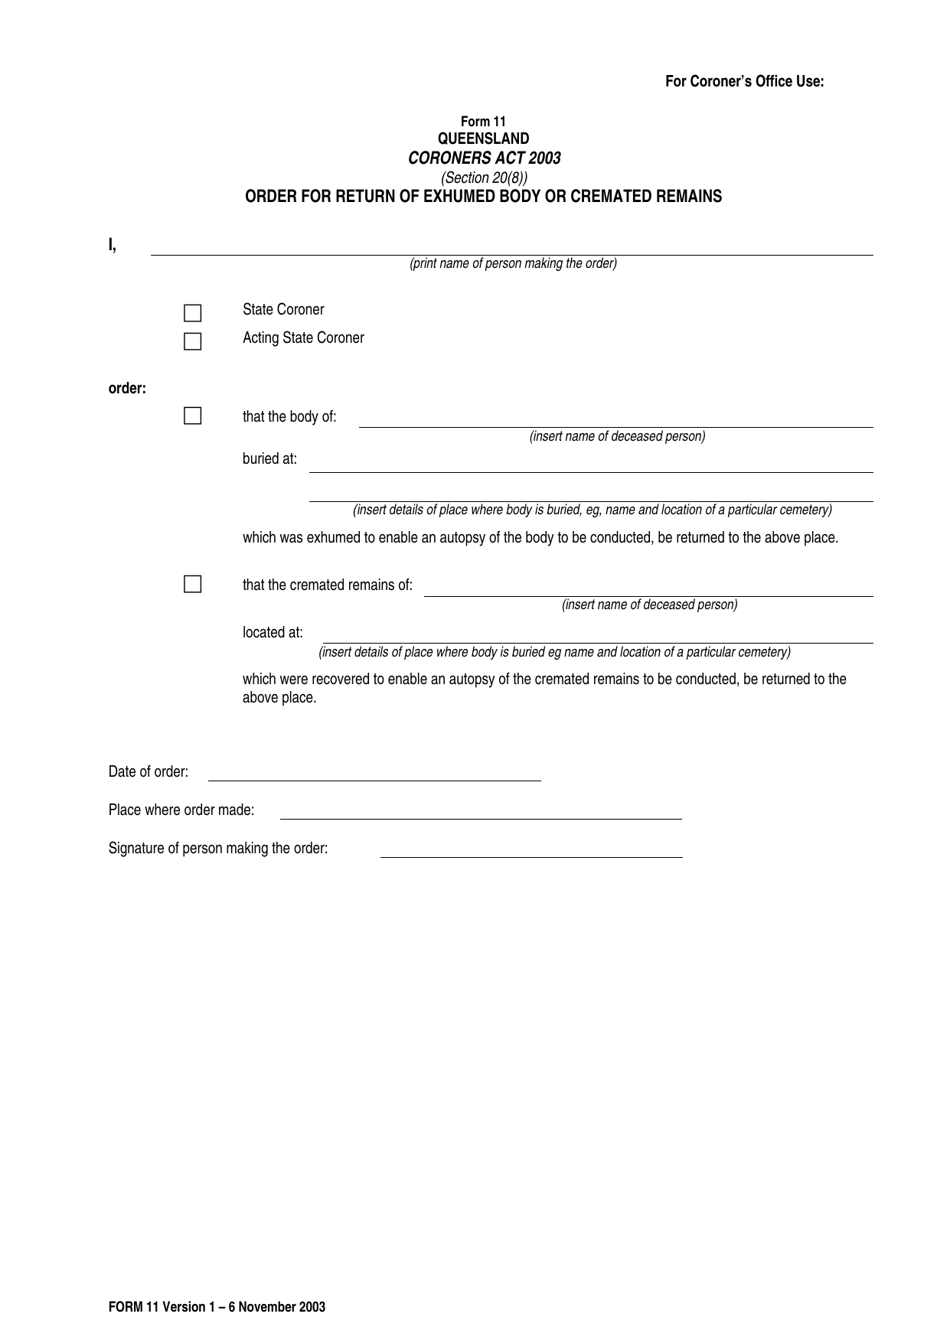 Form 11 Order for Release of Traditional Remains - Queensland, Australia, Page 1